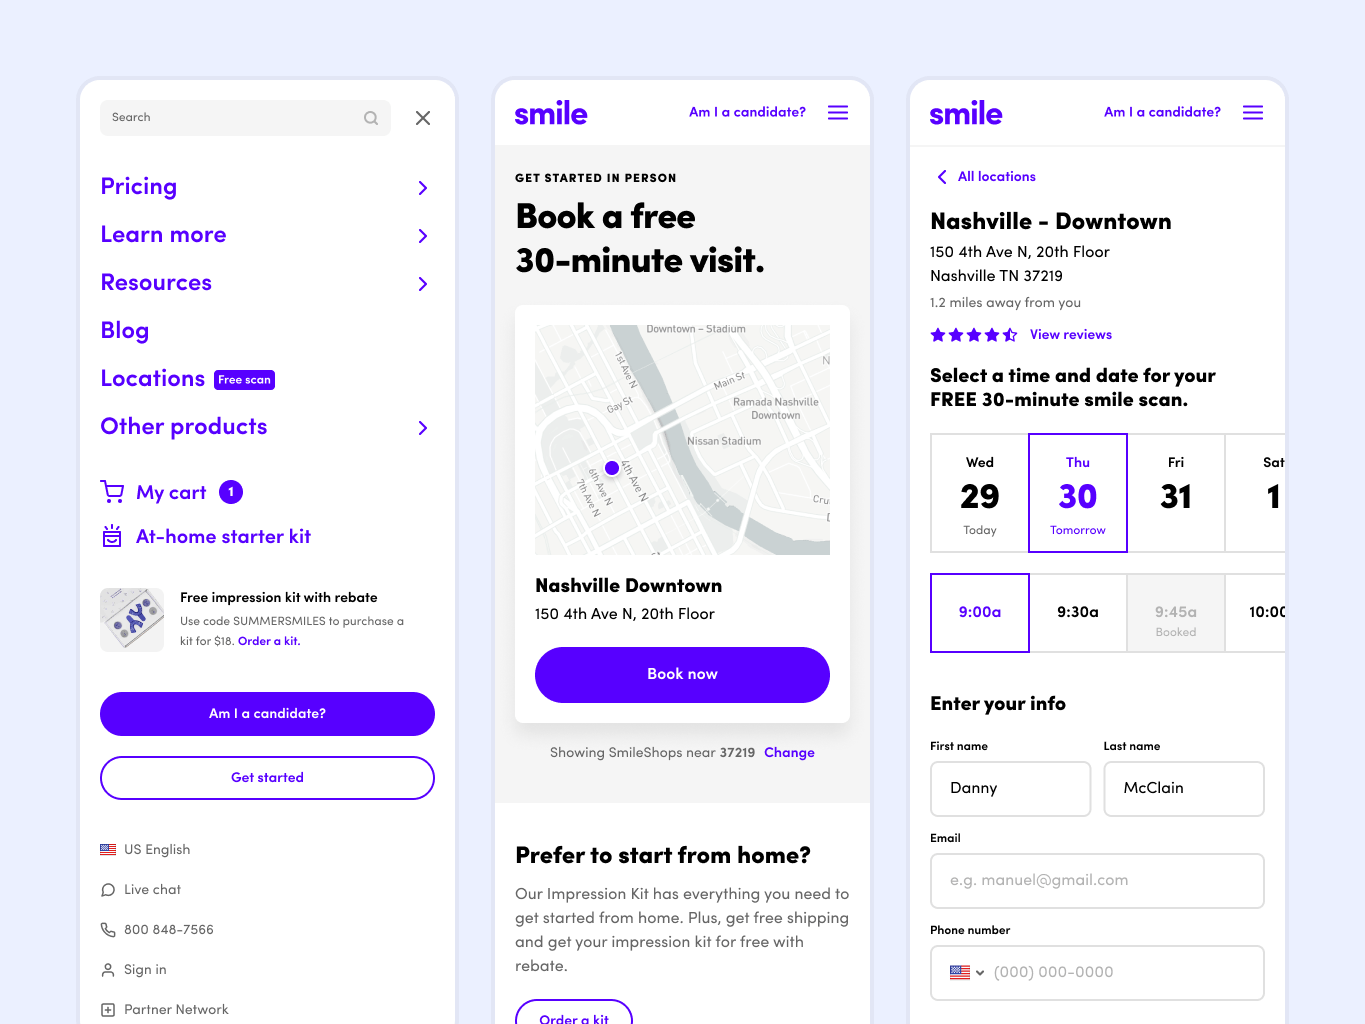 A few of the other projects I worked on: navigation, getting started, and booking a visit